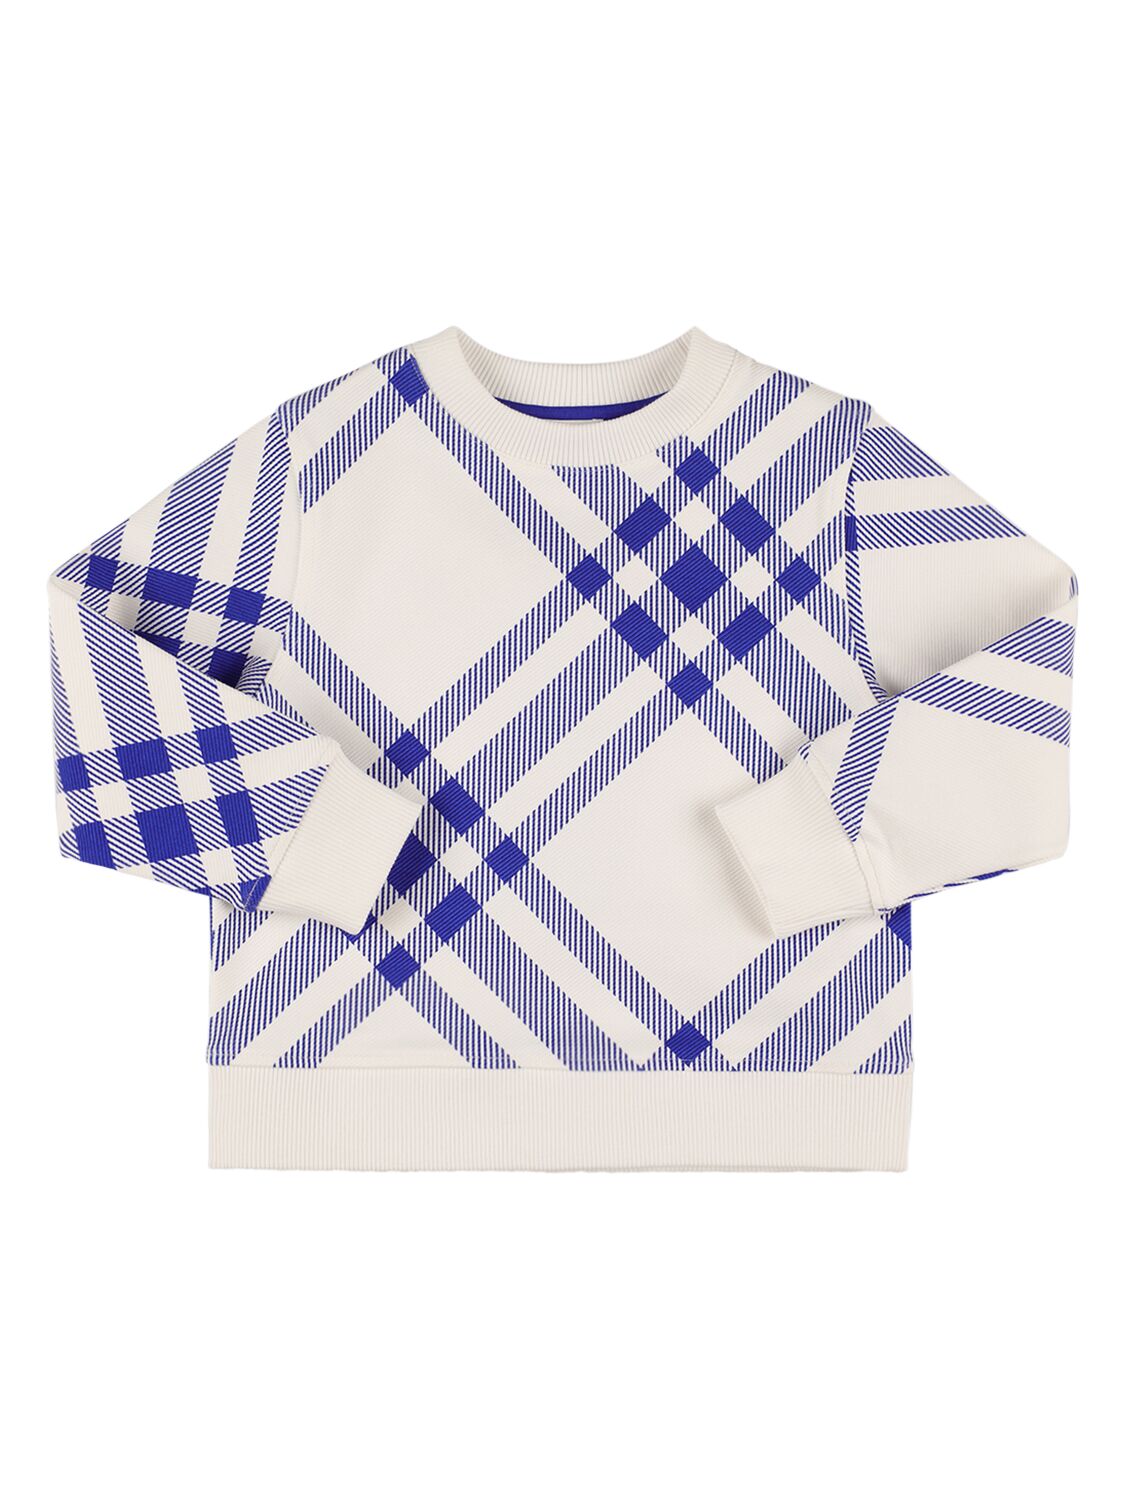 Image of Check Print Cotton Knit Sweater